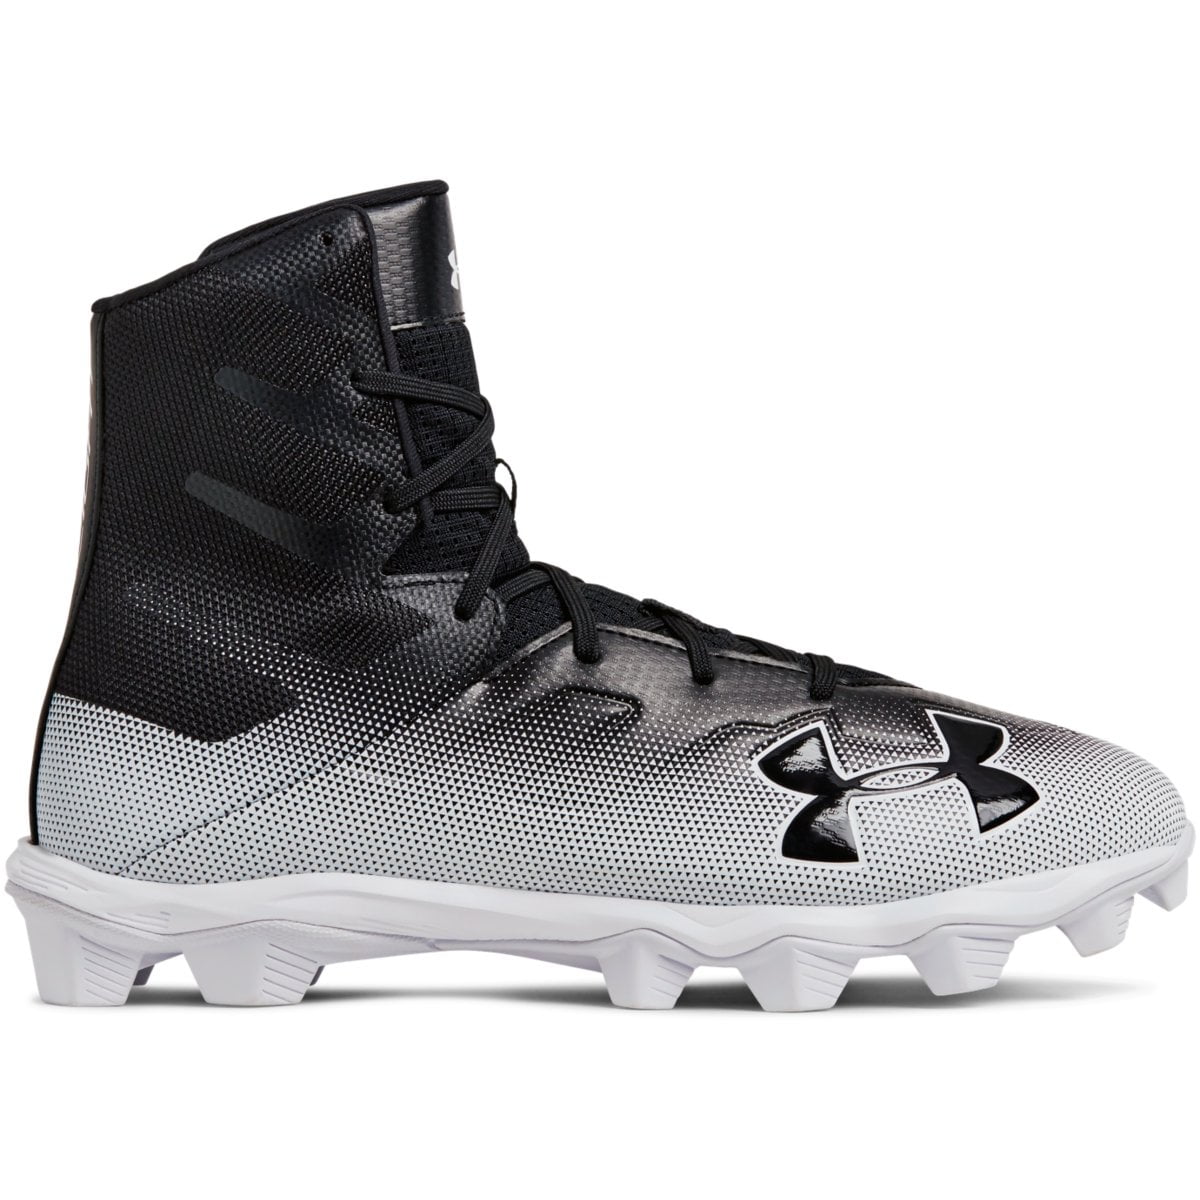 Under Armour Mens Highlight RM Football Cleats Black Size 8.5 M US